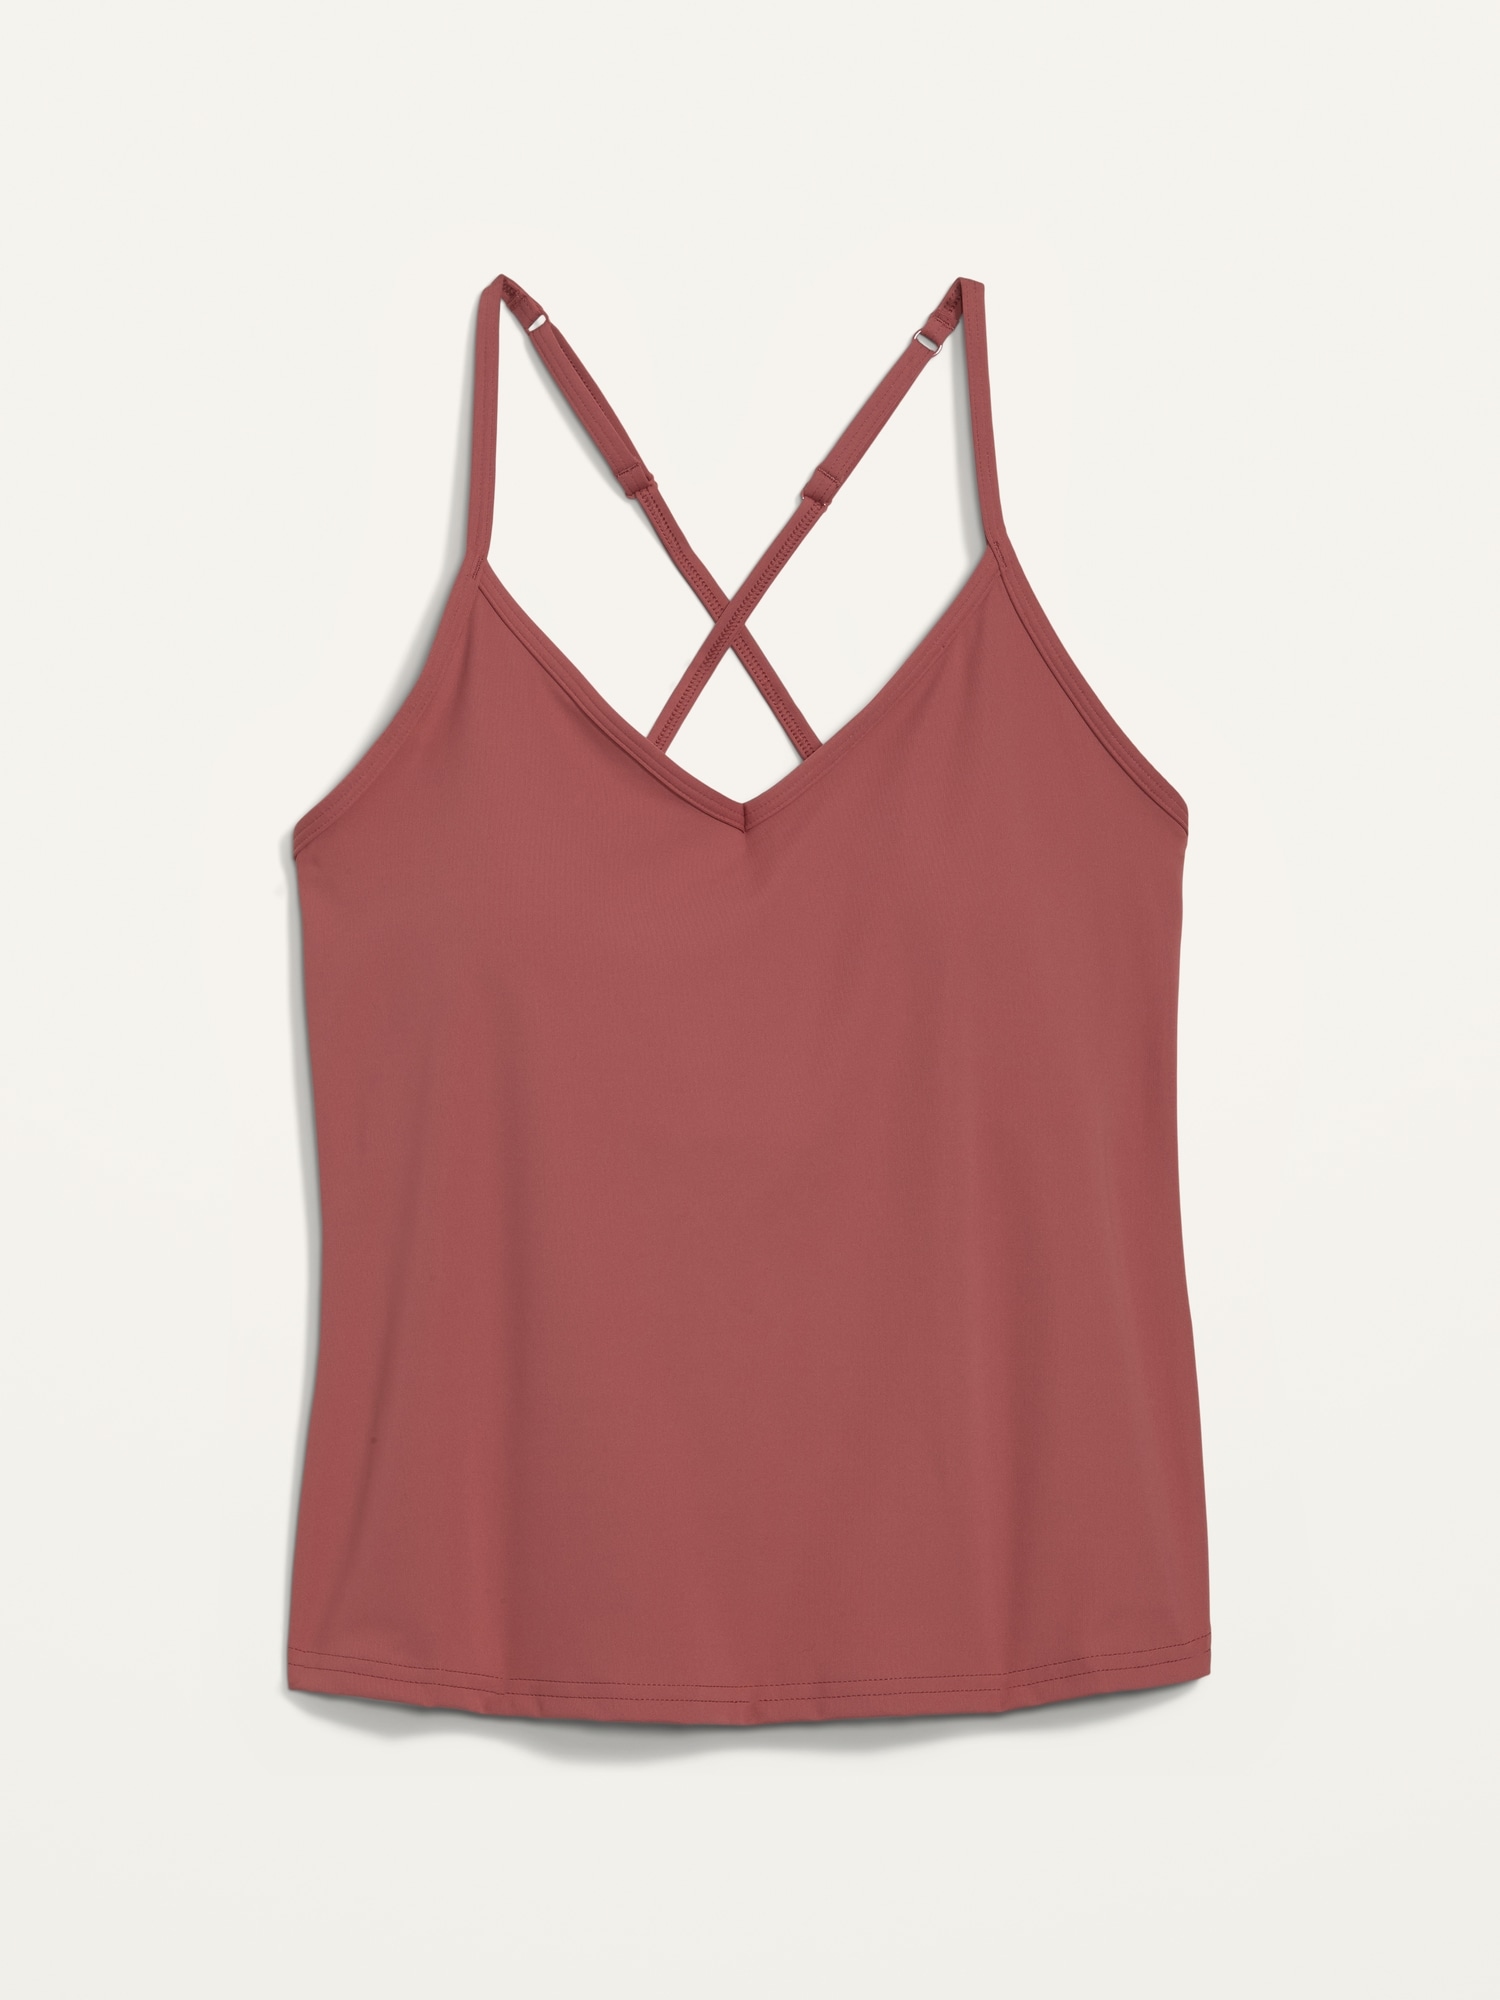 Old Navy Active Burgundy Cropped Camisole Tank Built In Bra Women's Shirt XL